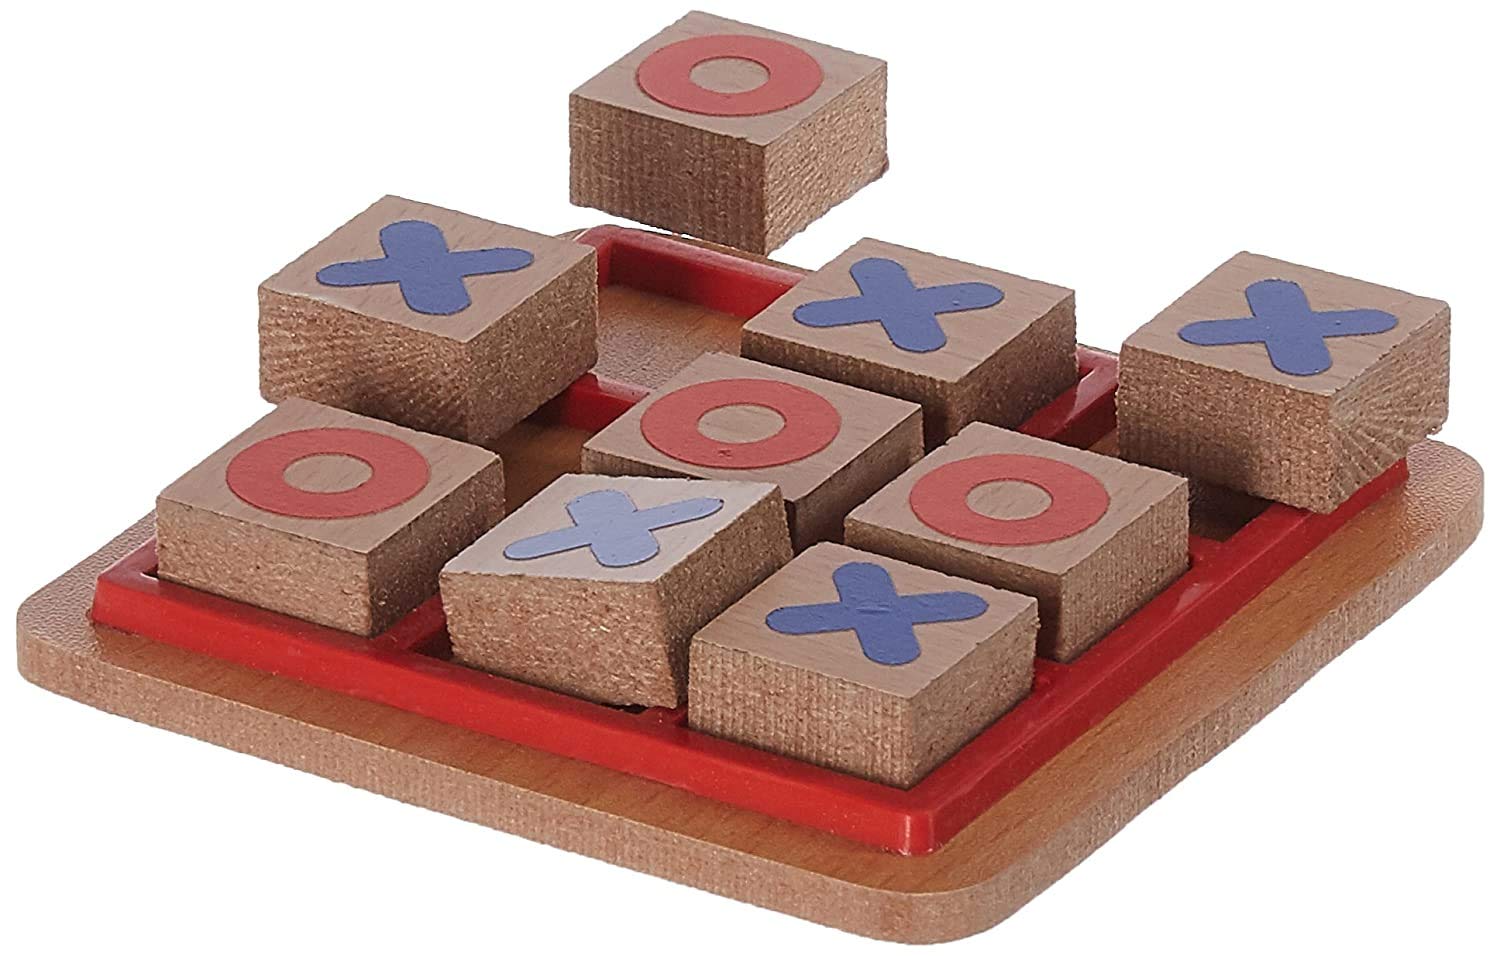 MANNAT Classic Tic Tac Toe Toy Game Zero and Cross Game Wooden Tic Tac Toe Game,tic tac Toy XOXO Toys